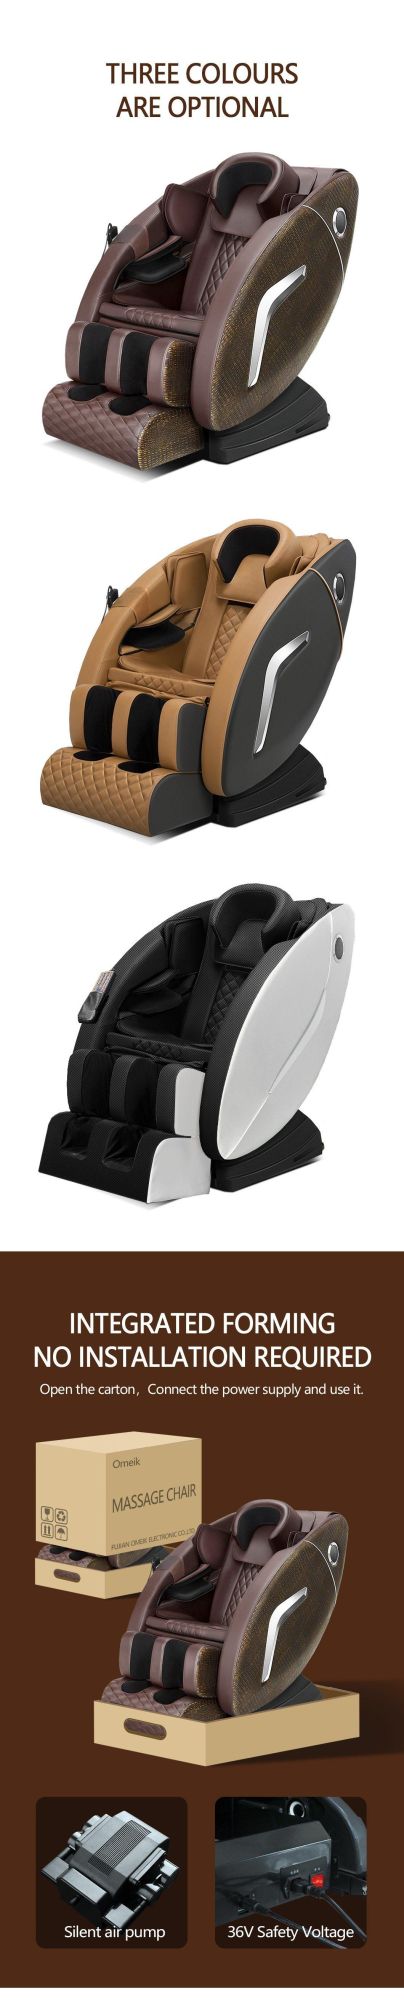 Wholesale Cheap Electric Health Care Relax Full Body Foot Massage Chair with Head Massage